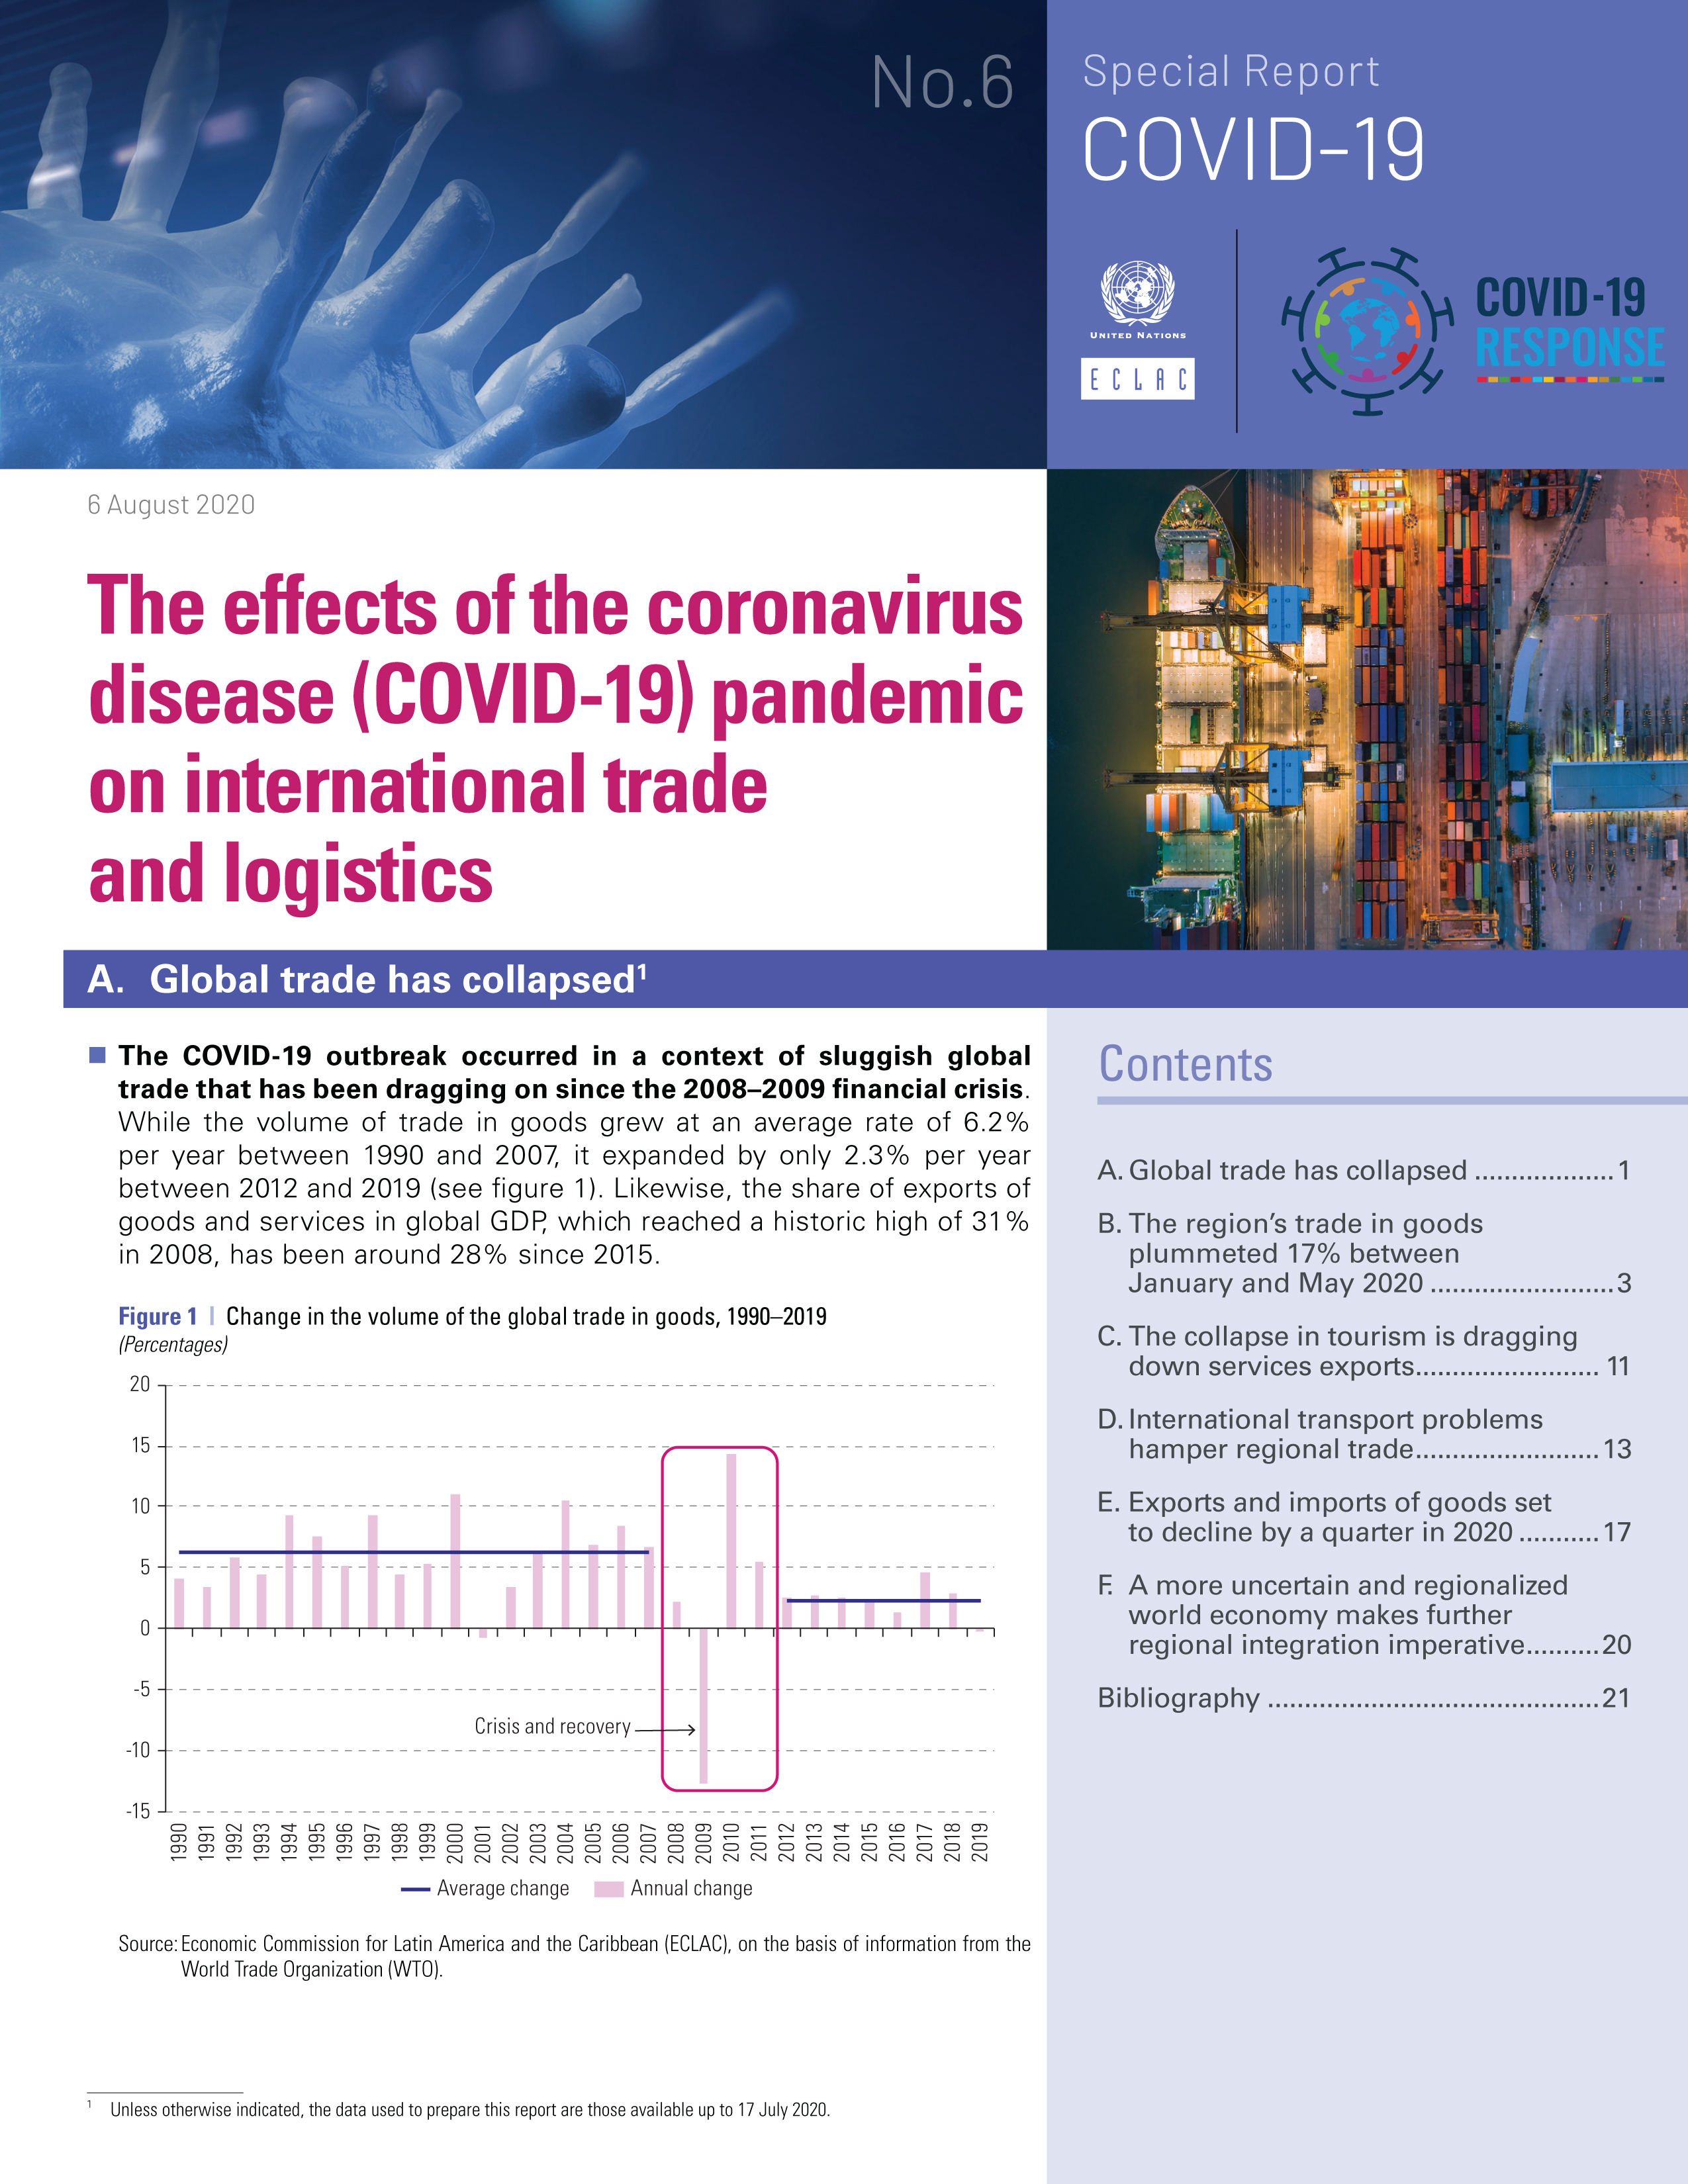 image of The Effects of the Coronavirus Disease (COVID-19) Pandemic on International Trade and Logistics